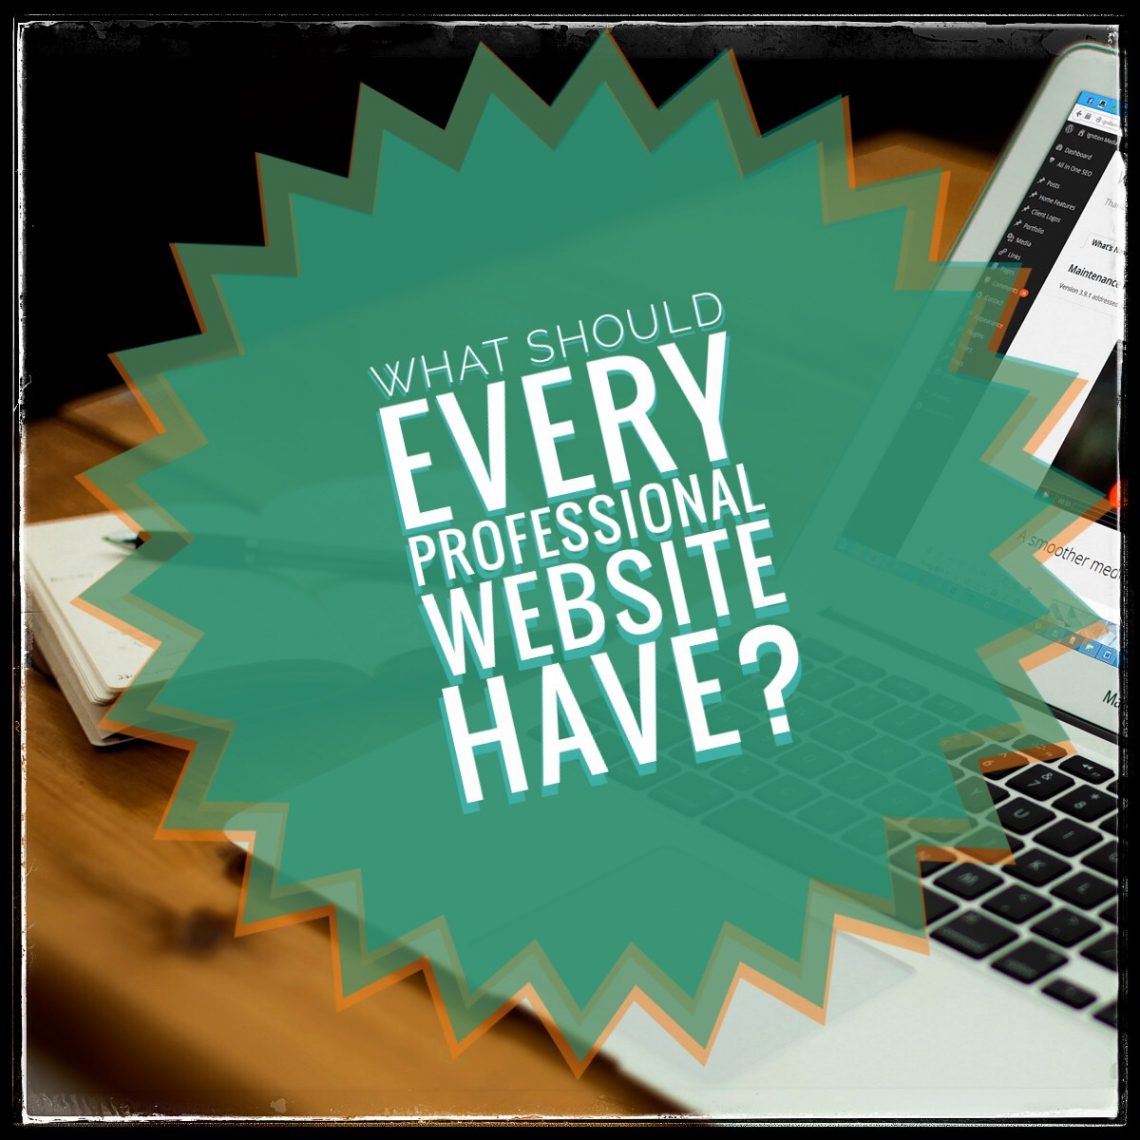 What Should very professional Website Have?